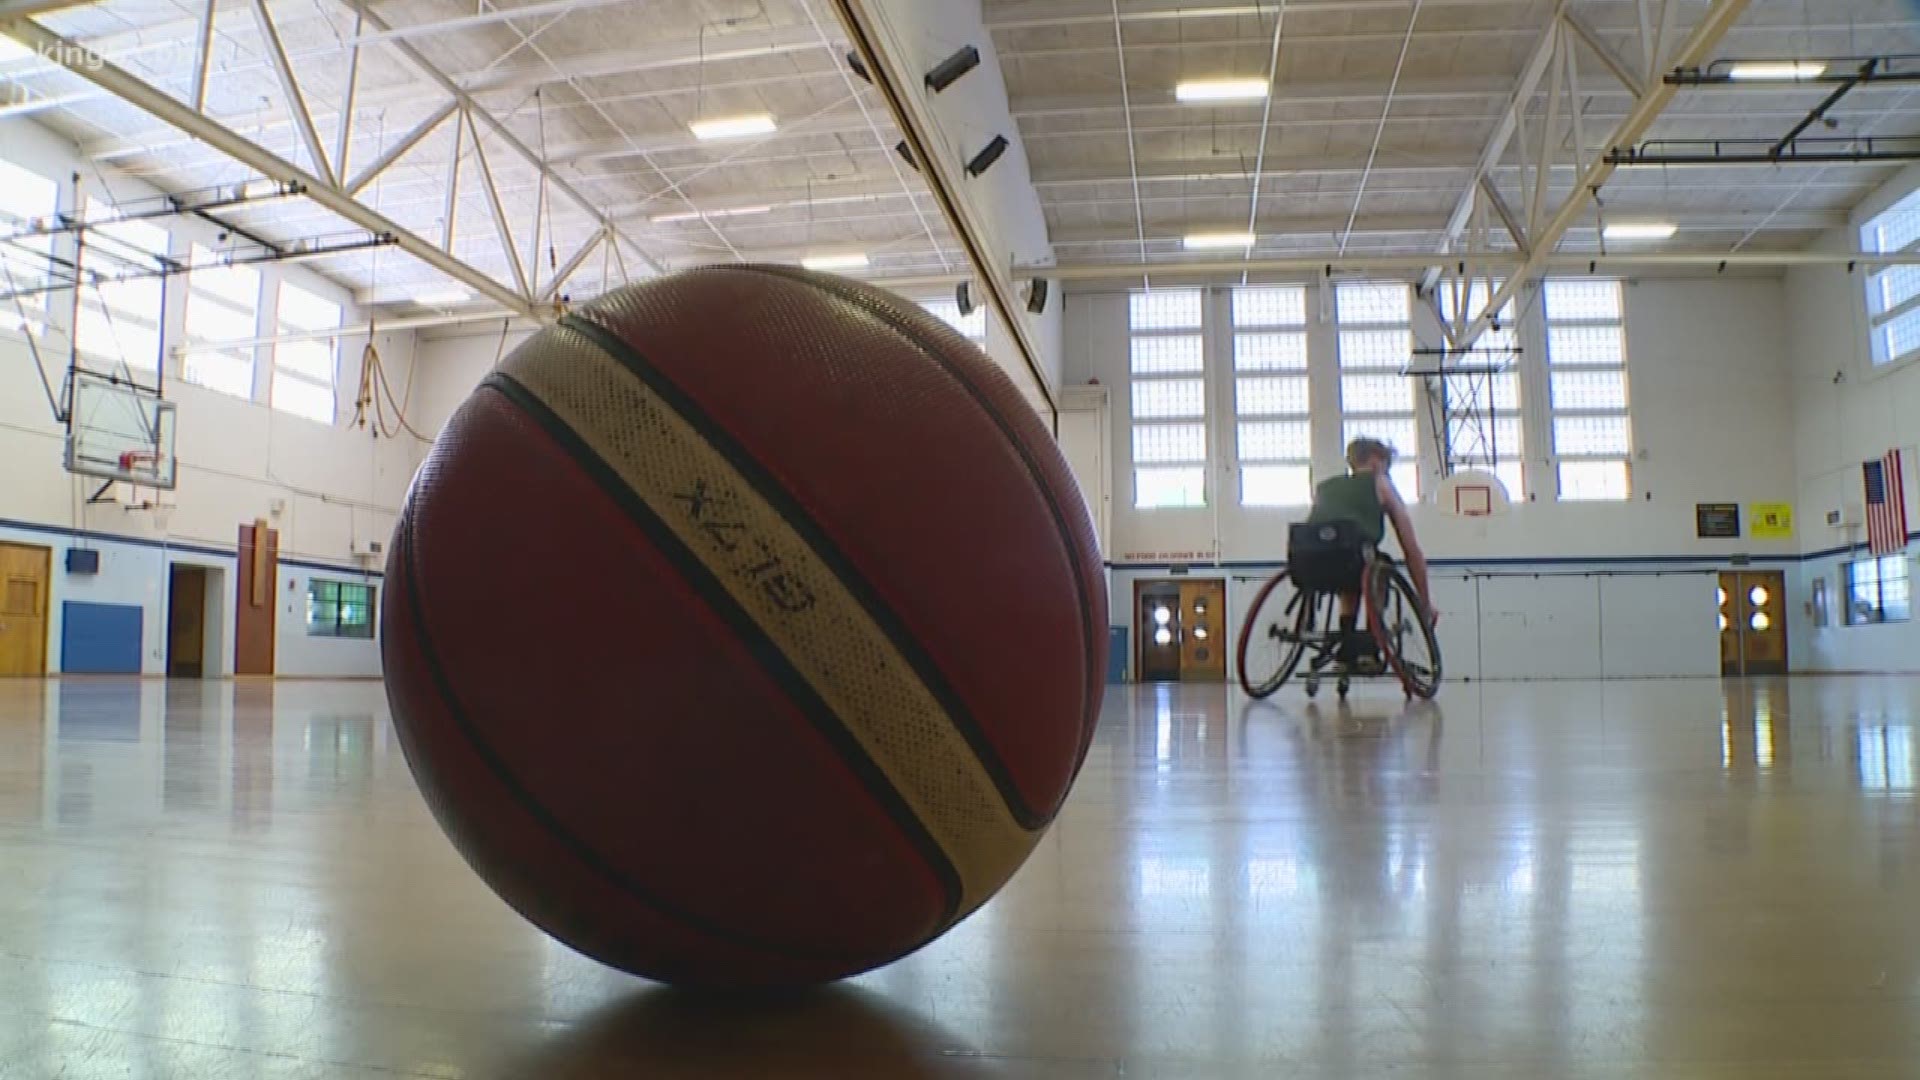 A group of local high school basketball players are heading to a national tournament, where they'll play against some of the top teams in the country. They have some limitations, but that say it actually makes them stronger. Here's KING 5's Ted Land with the story.